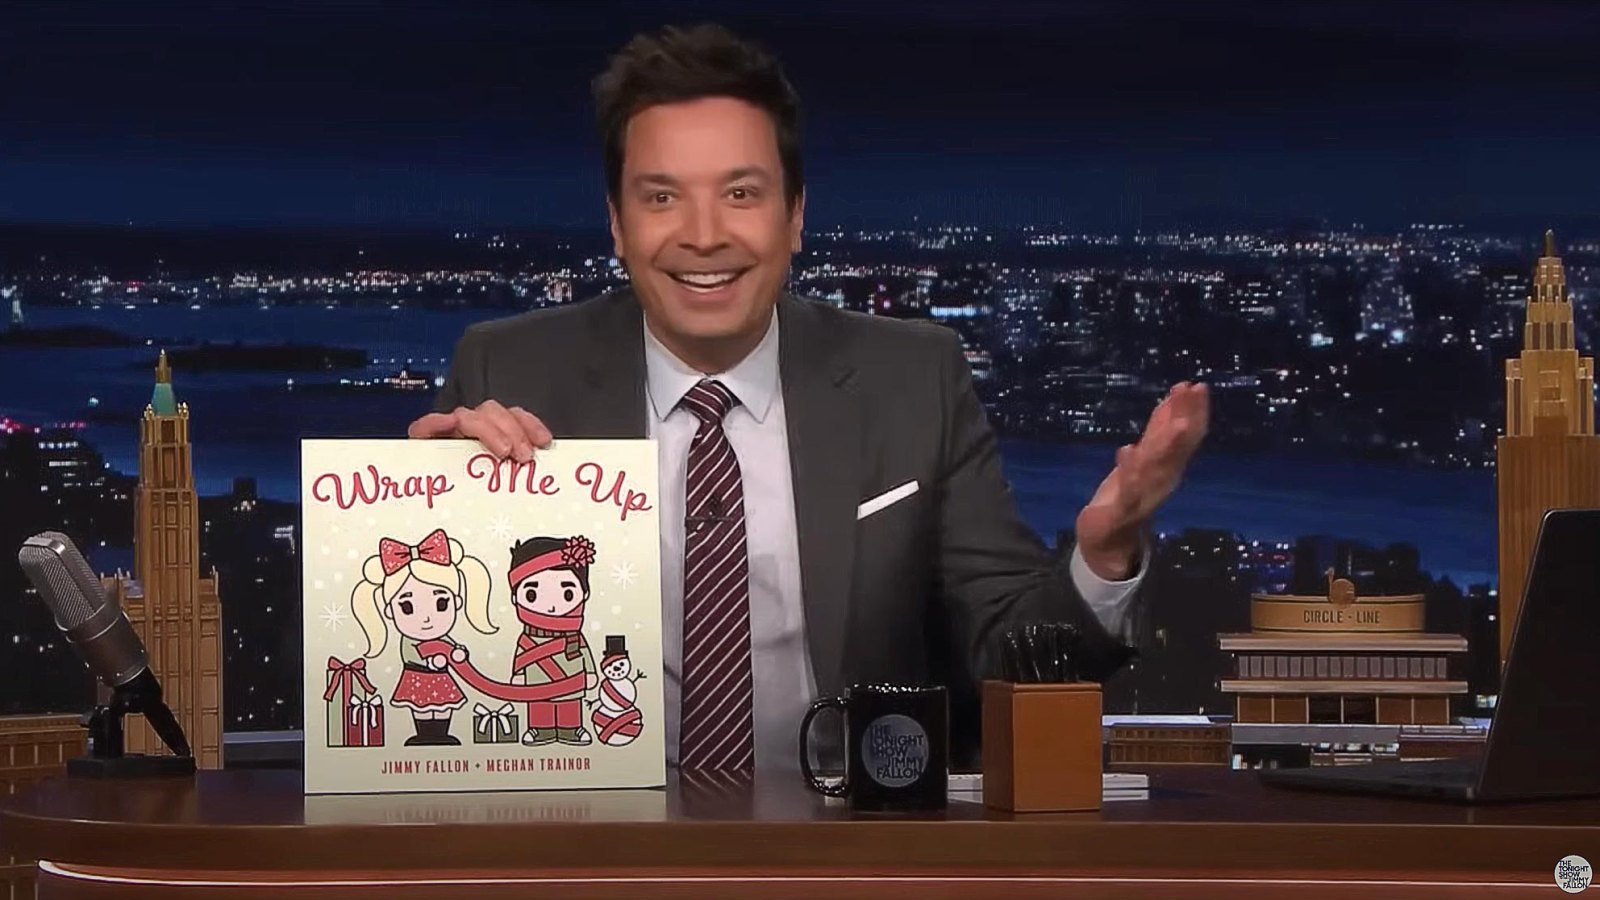 Jimmy Fallon Announces New Wrap Me Up Christmas Song With Meghan Trainor This Song Eats. 031